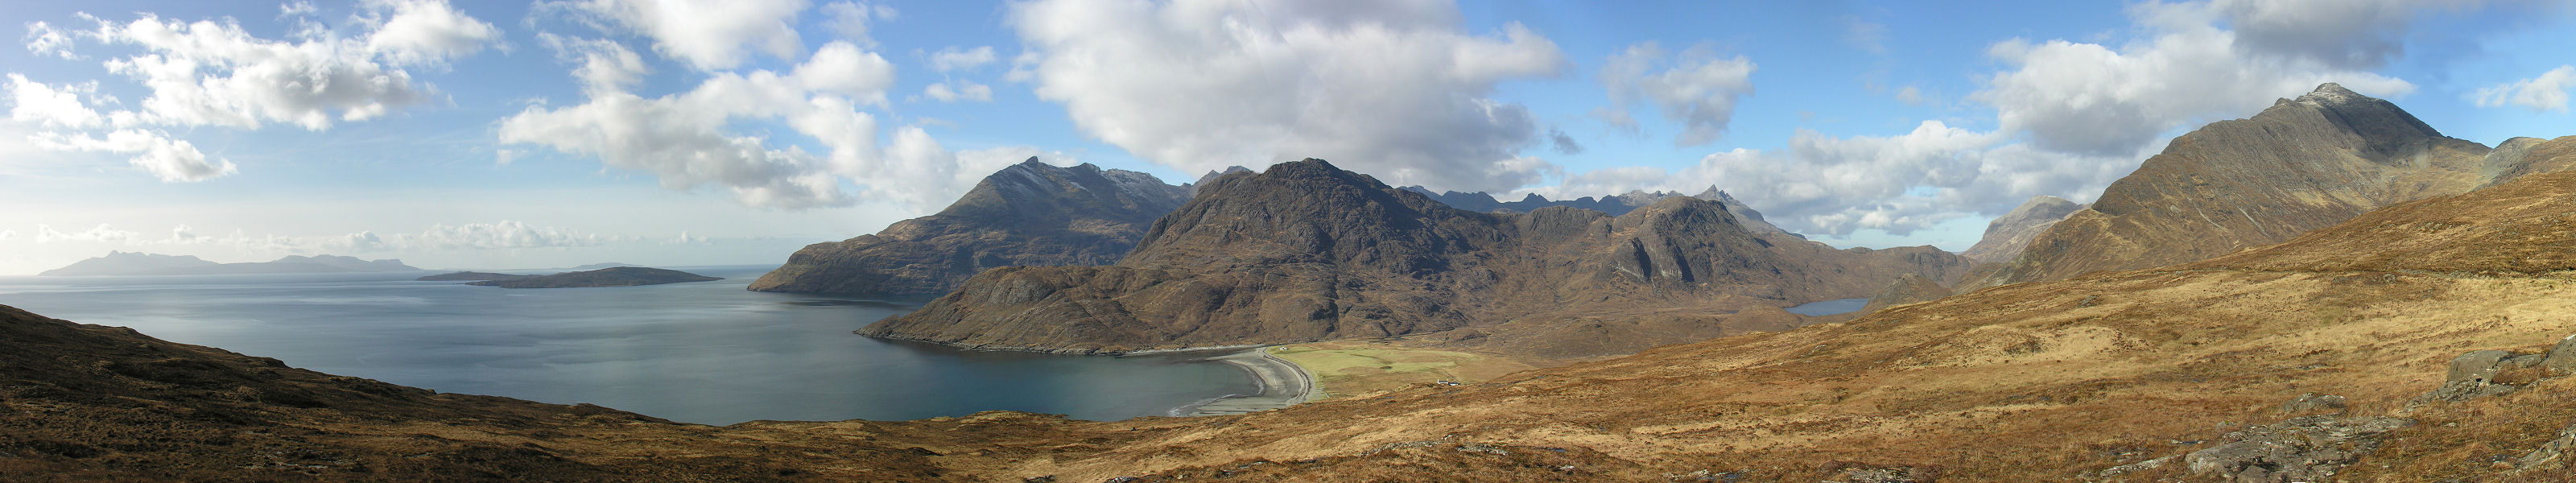 Panorama of the Cuillin